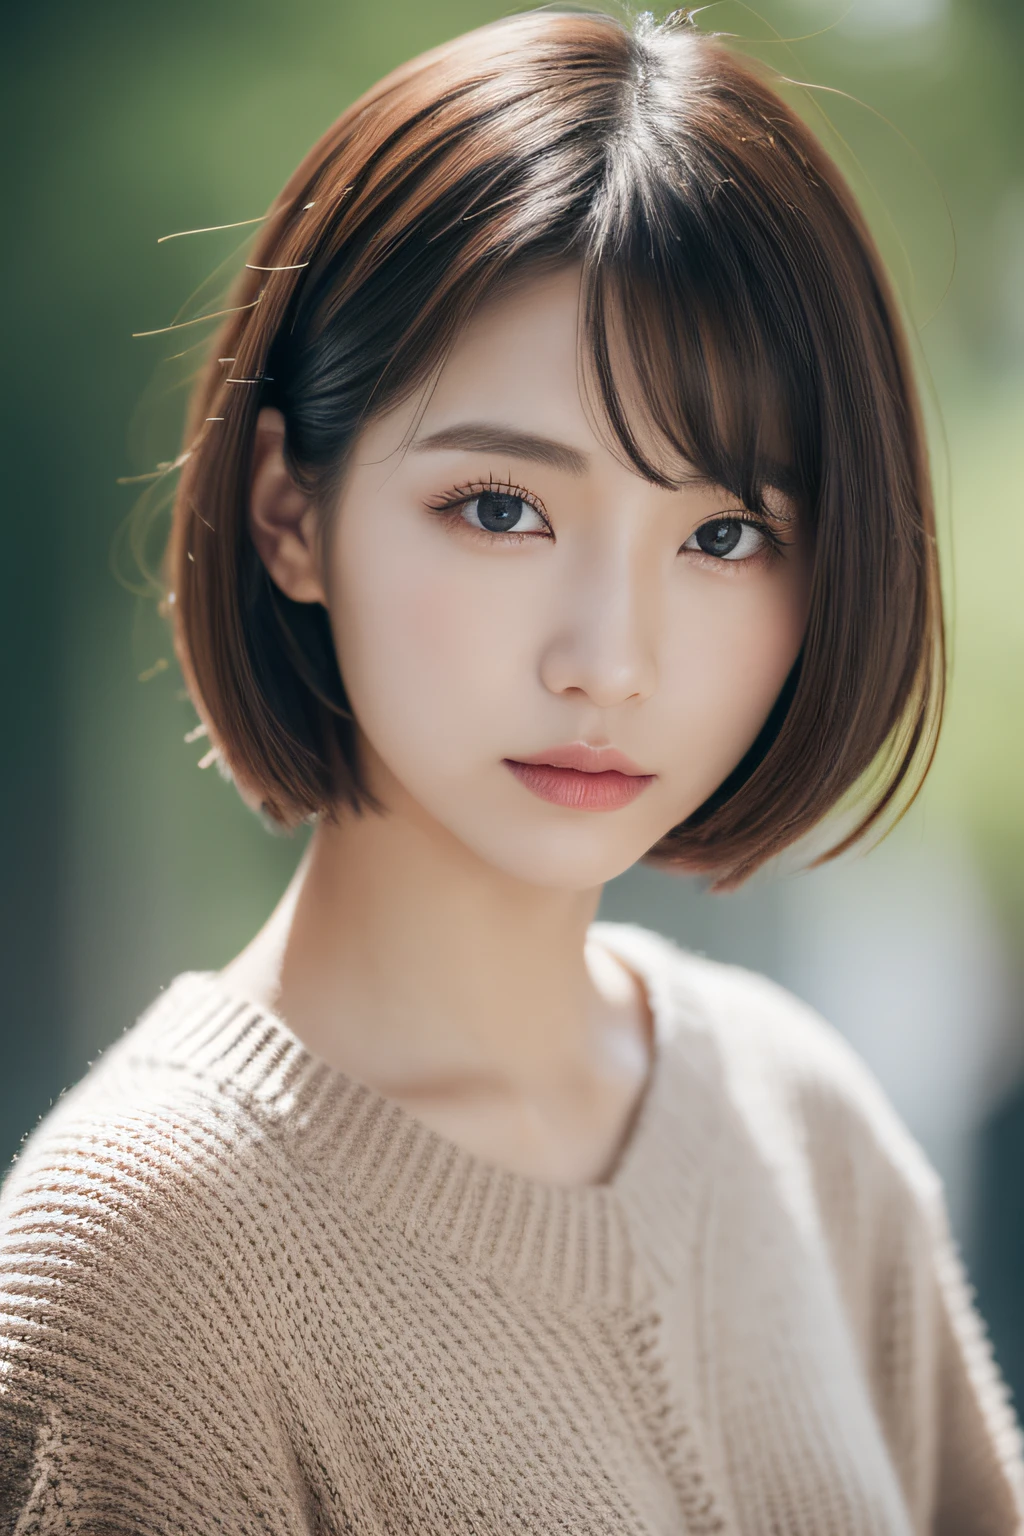 a close up of a woman with a sweater on posing for a picture, Middle metaverse, Yoshitomo Nara, Japanese Models, Beautiful Asian Girl, With short hair, 2 4 years old female model, 4 K ], 4K], 2 7 years old, sakimichan, sakimichan